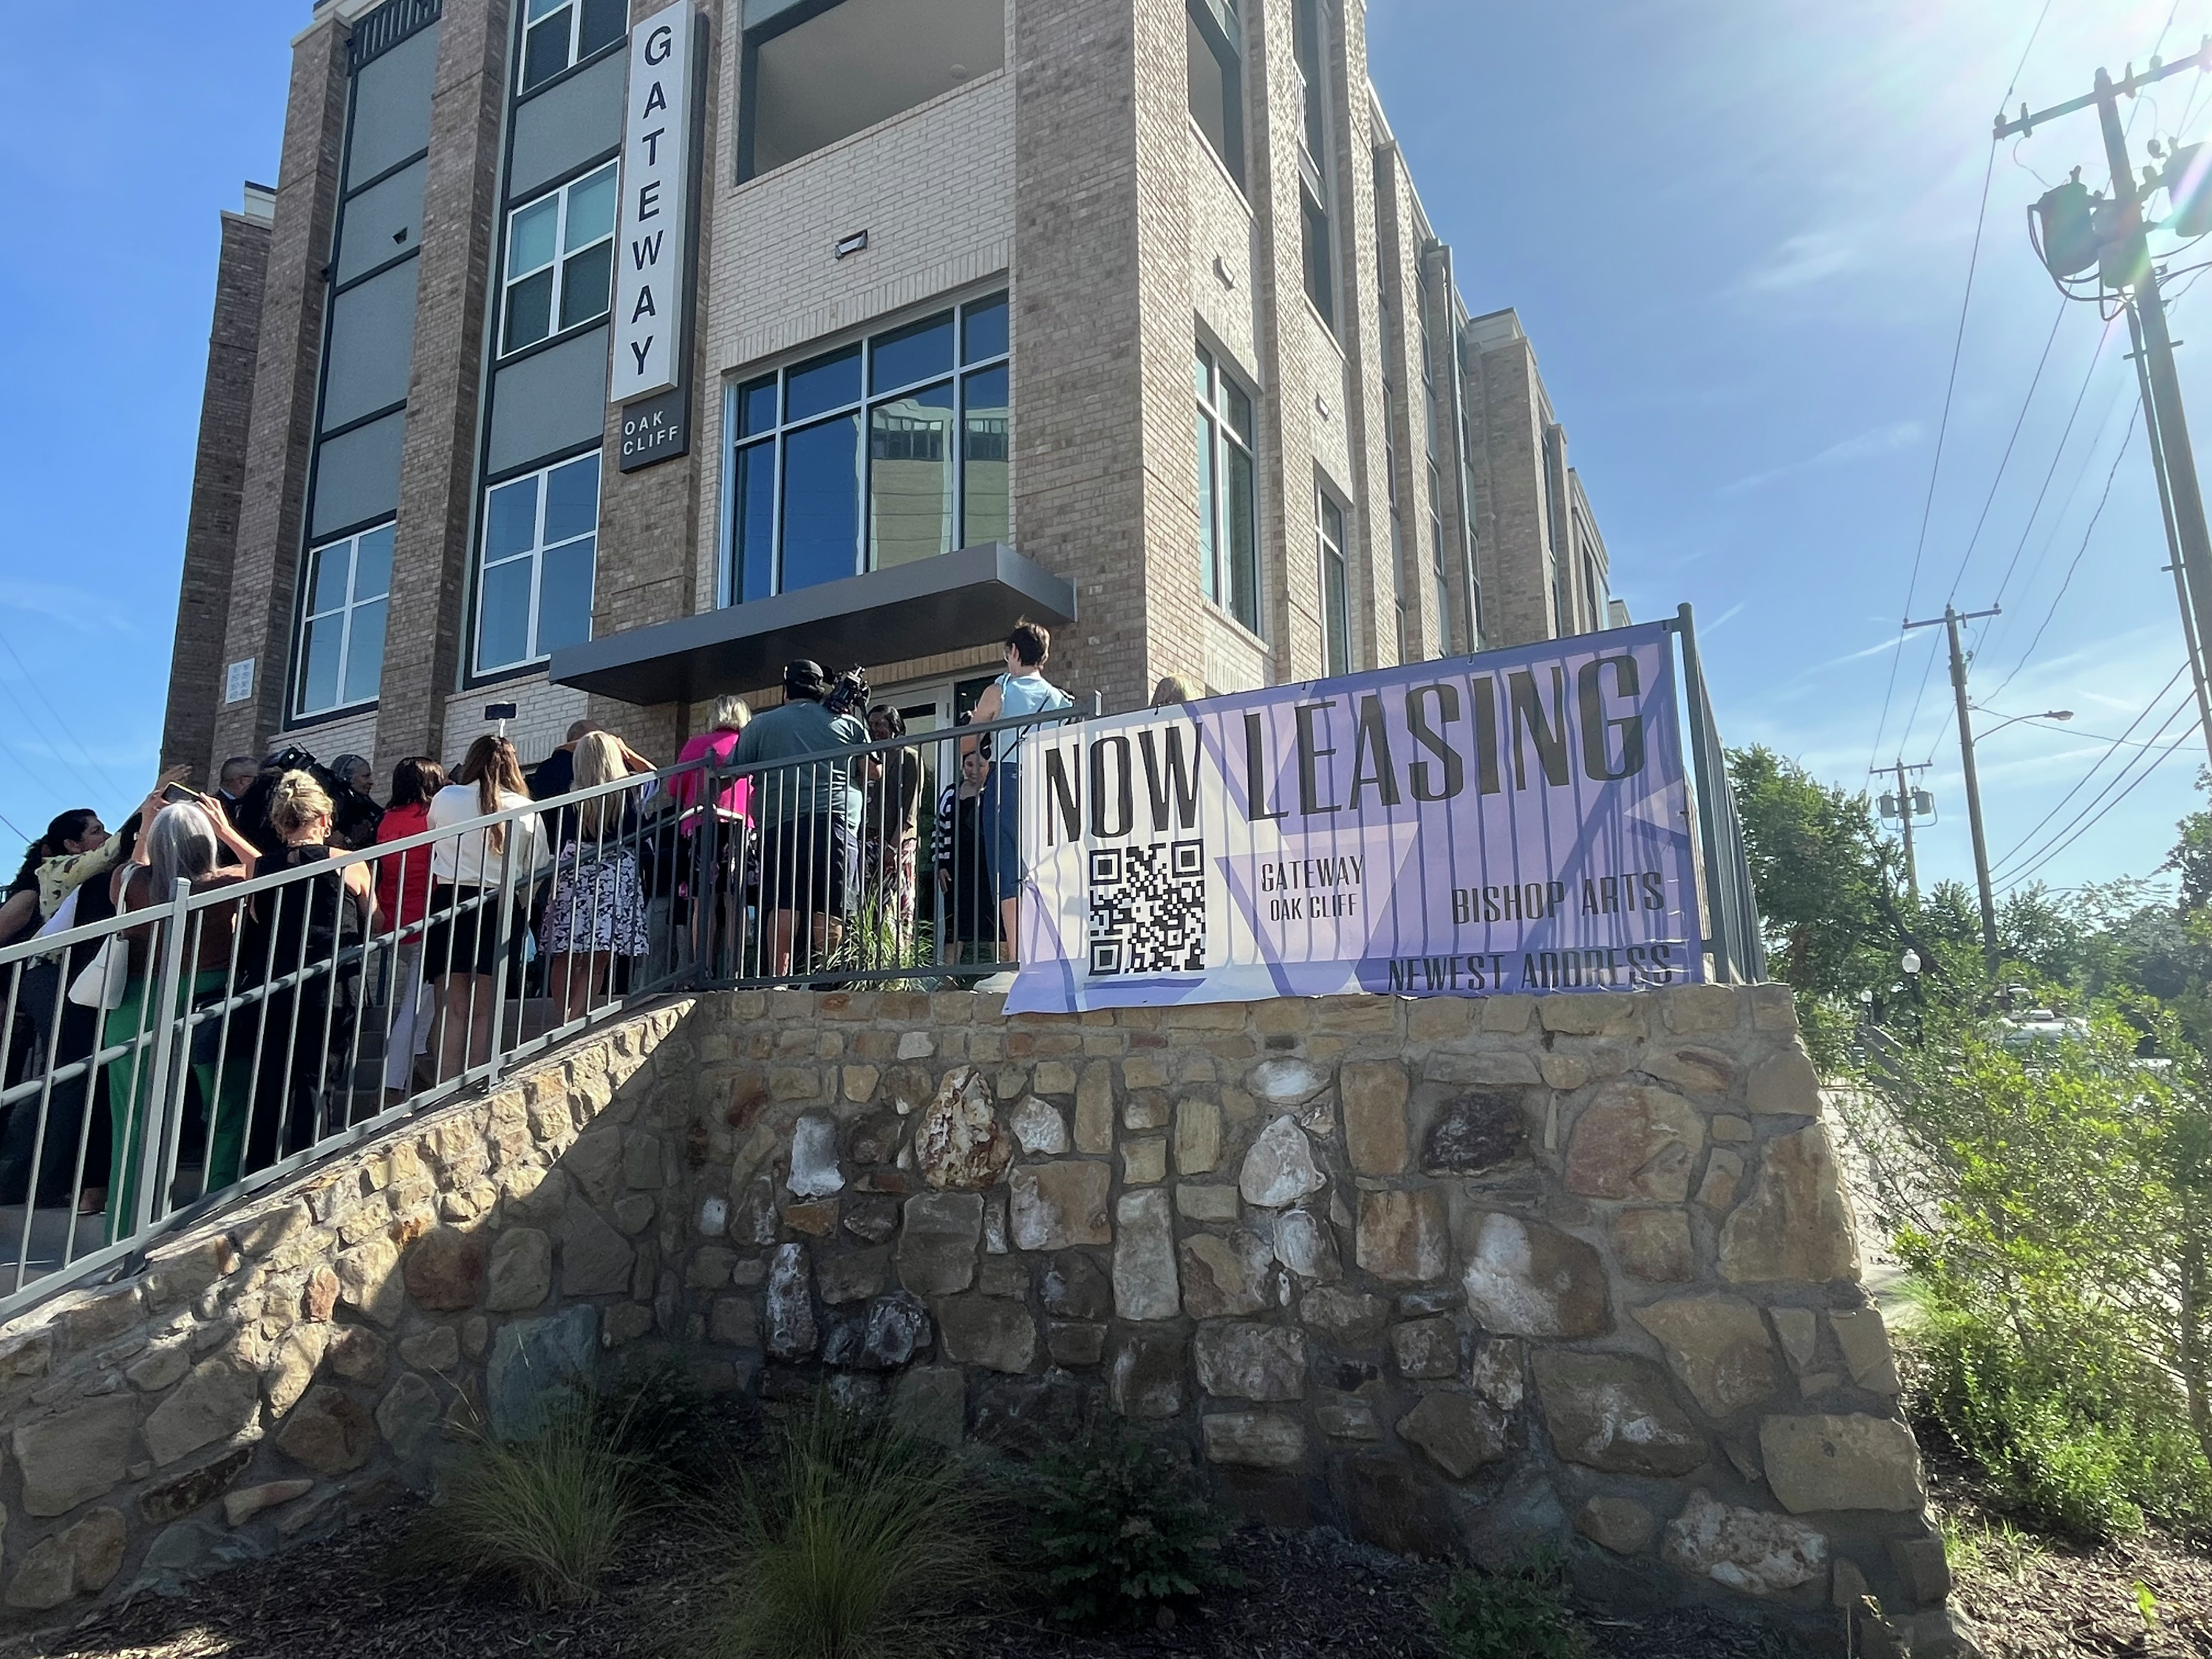 Dallas County and developers cut ribbon on mixed-income apartments